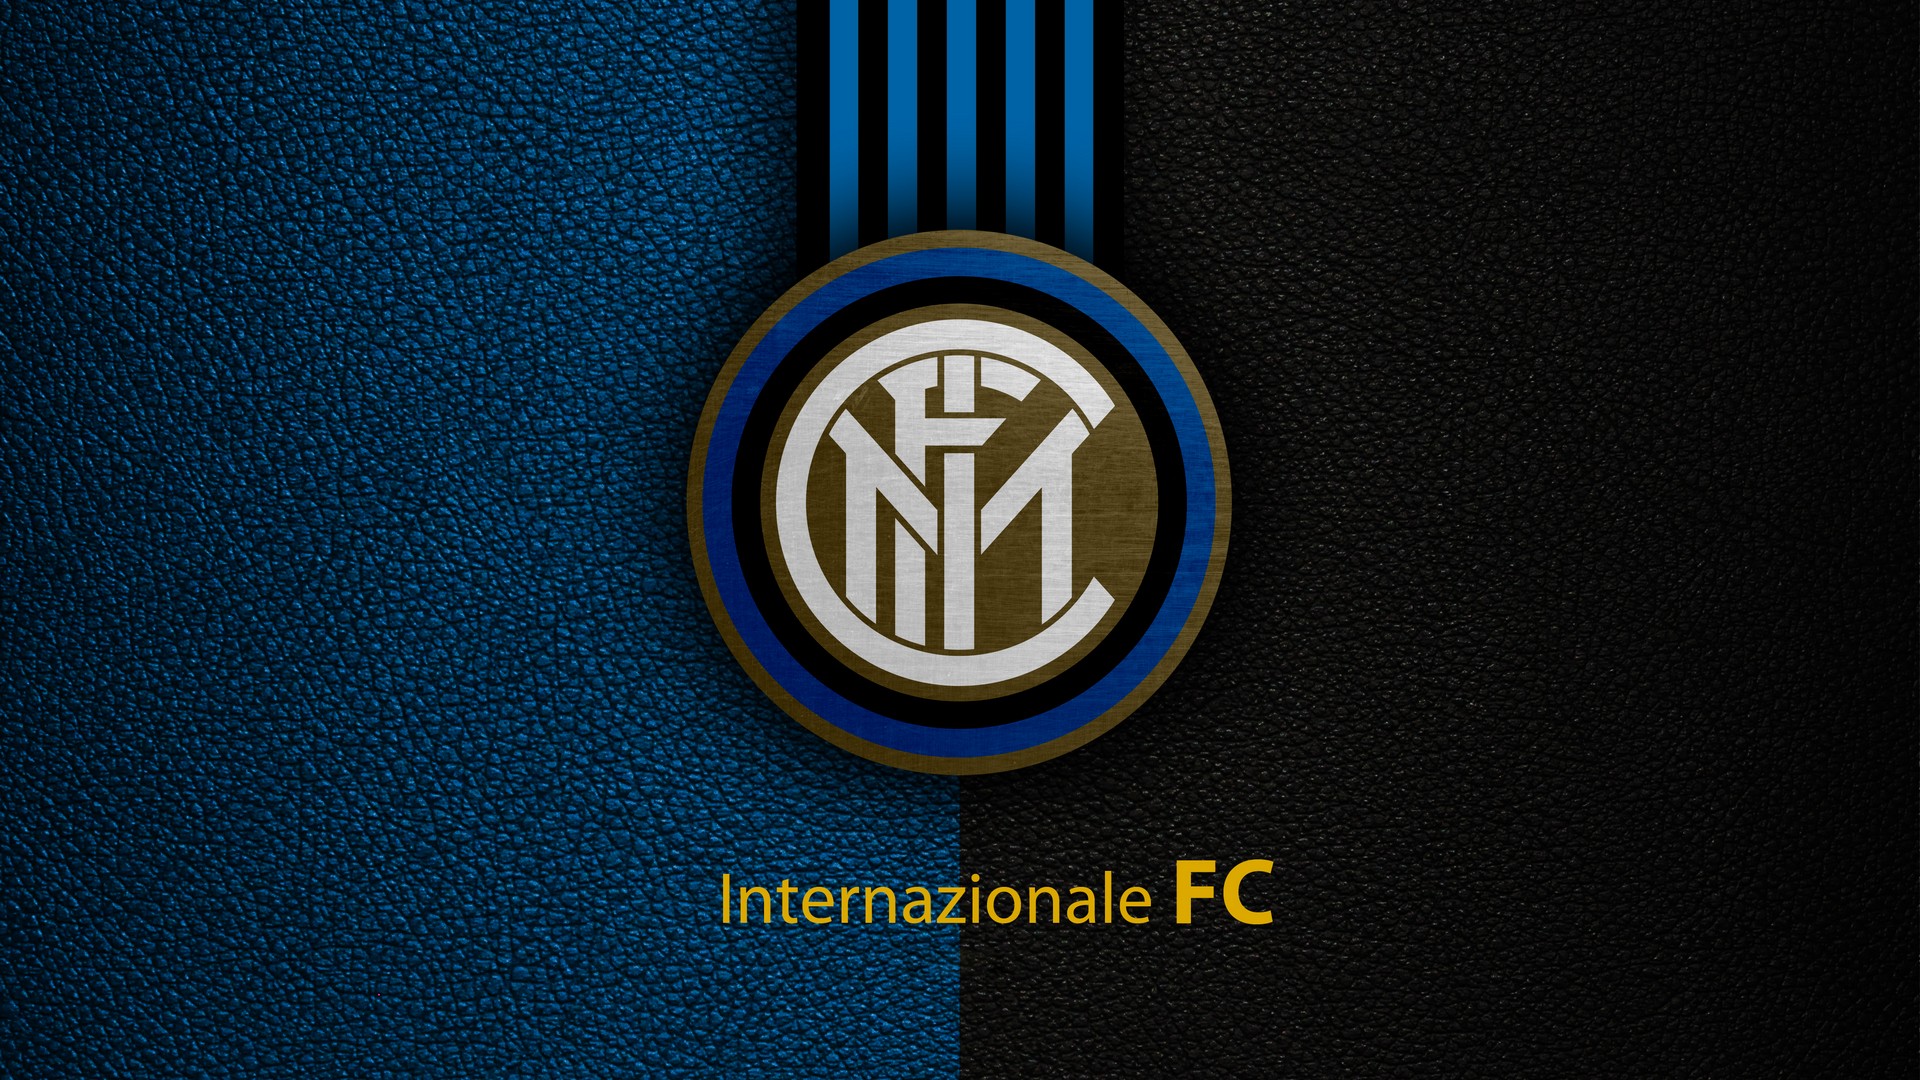 Wallpaper Desktop Inter Milan HD with high-resolution 1920x1080 pixel. You can use this wallpaper for your Desktop Computers, Mac Screensavers, Windows Backgrounds, iPhone Wallpapers, Tablet or Android Lock screen and another Mobile device